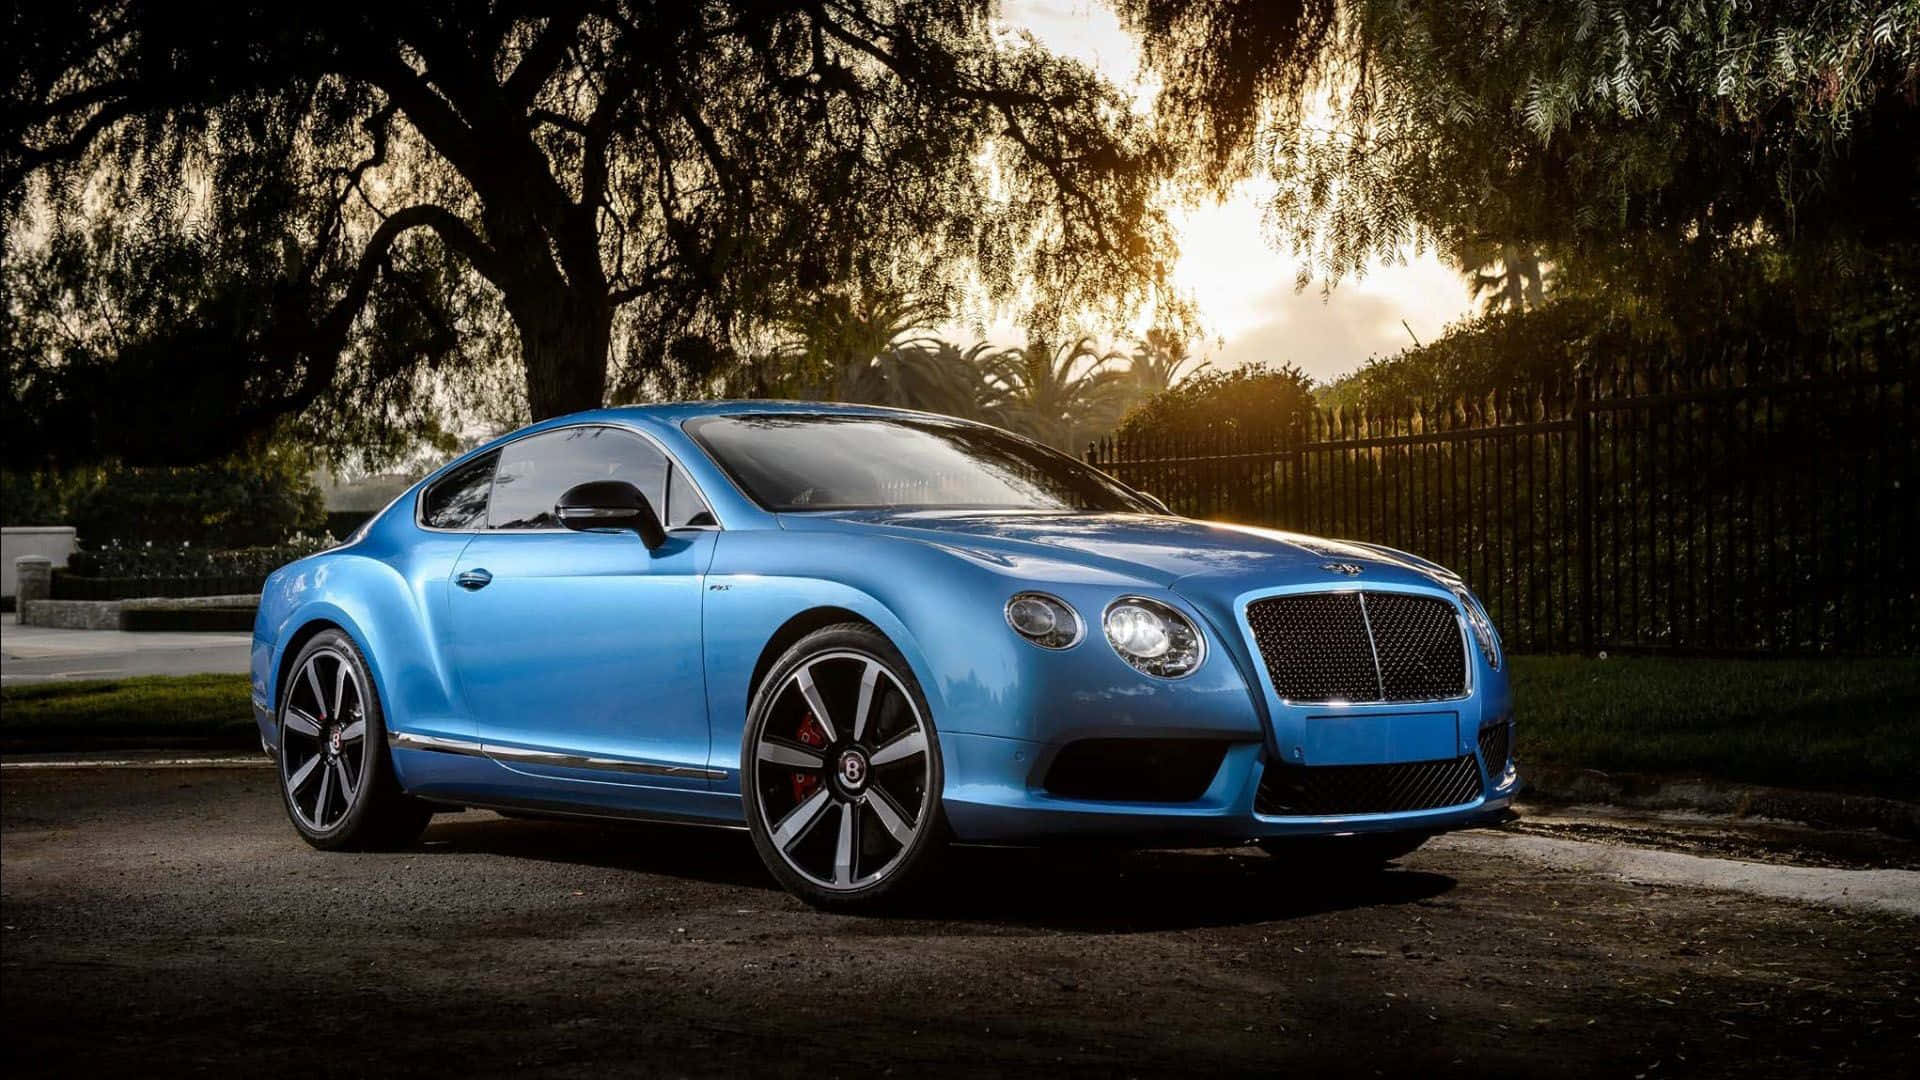 Experience luxury in a stylish Bentley.